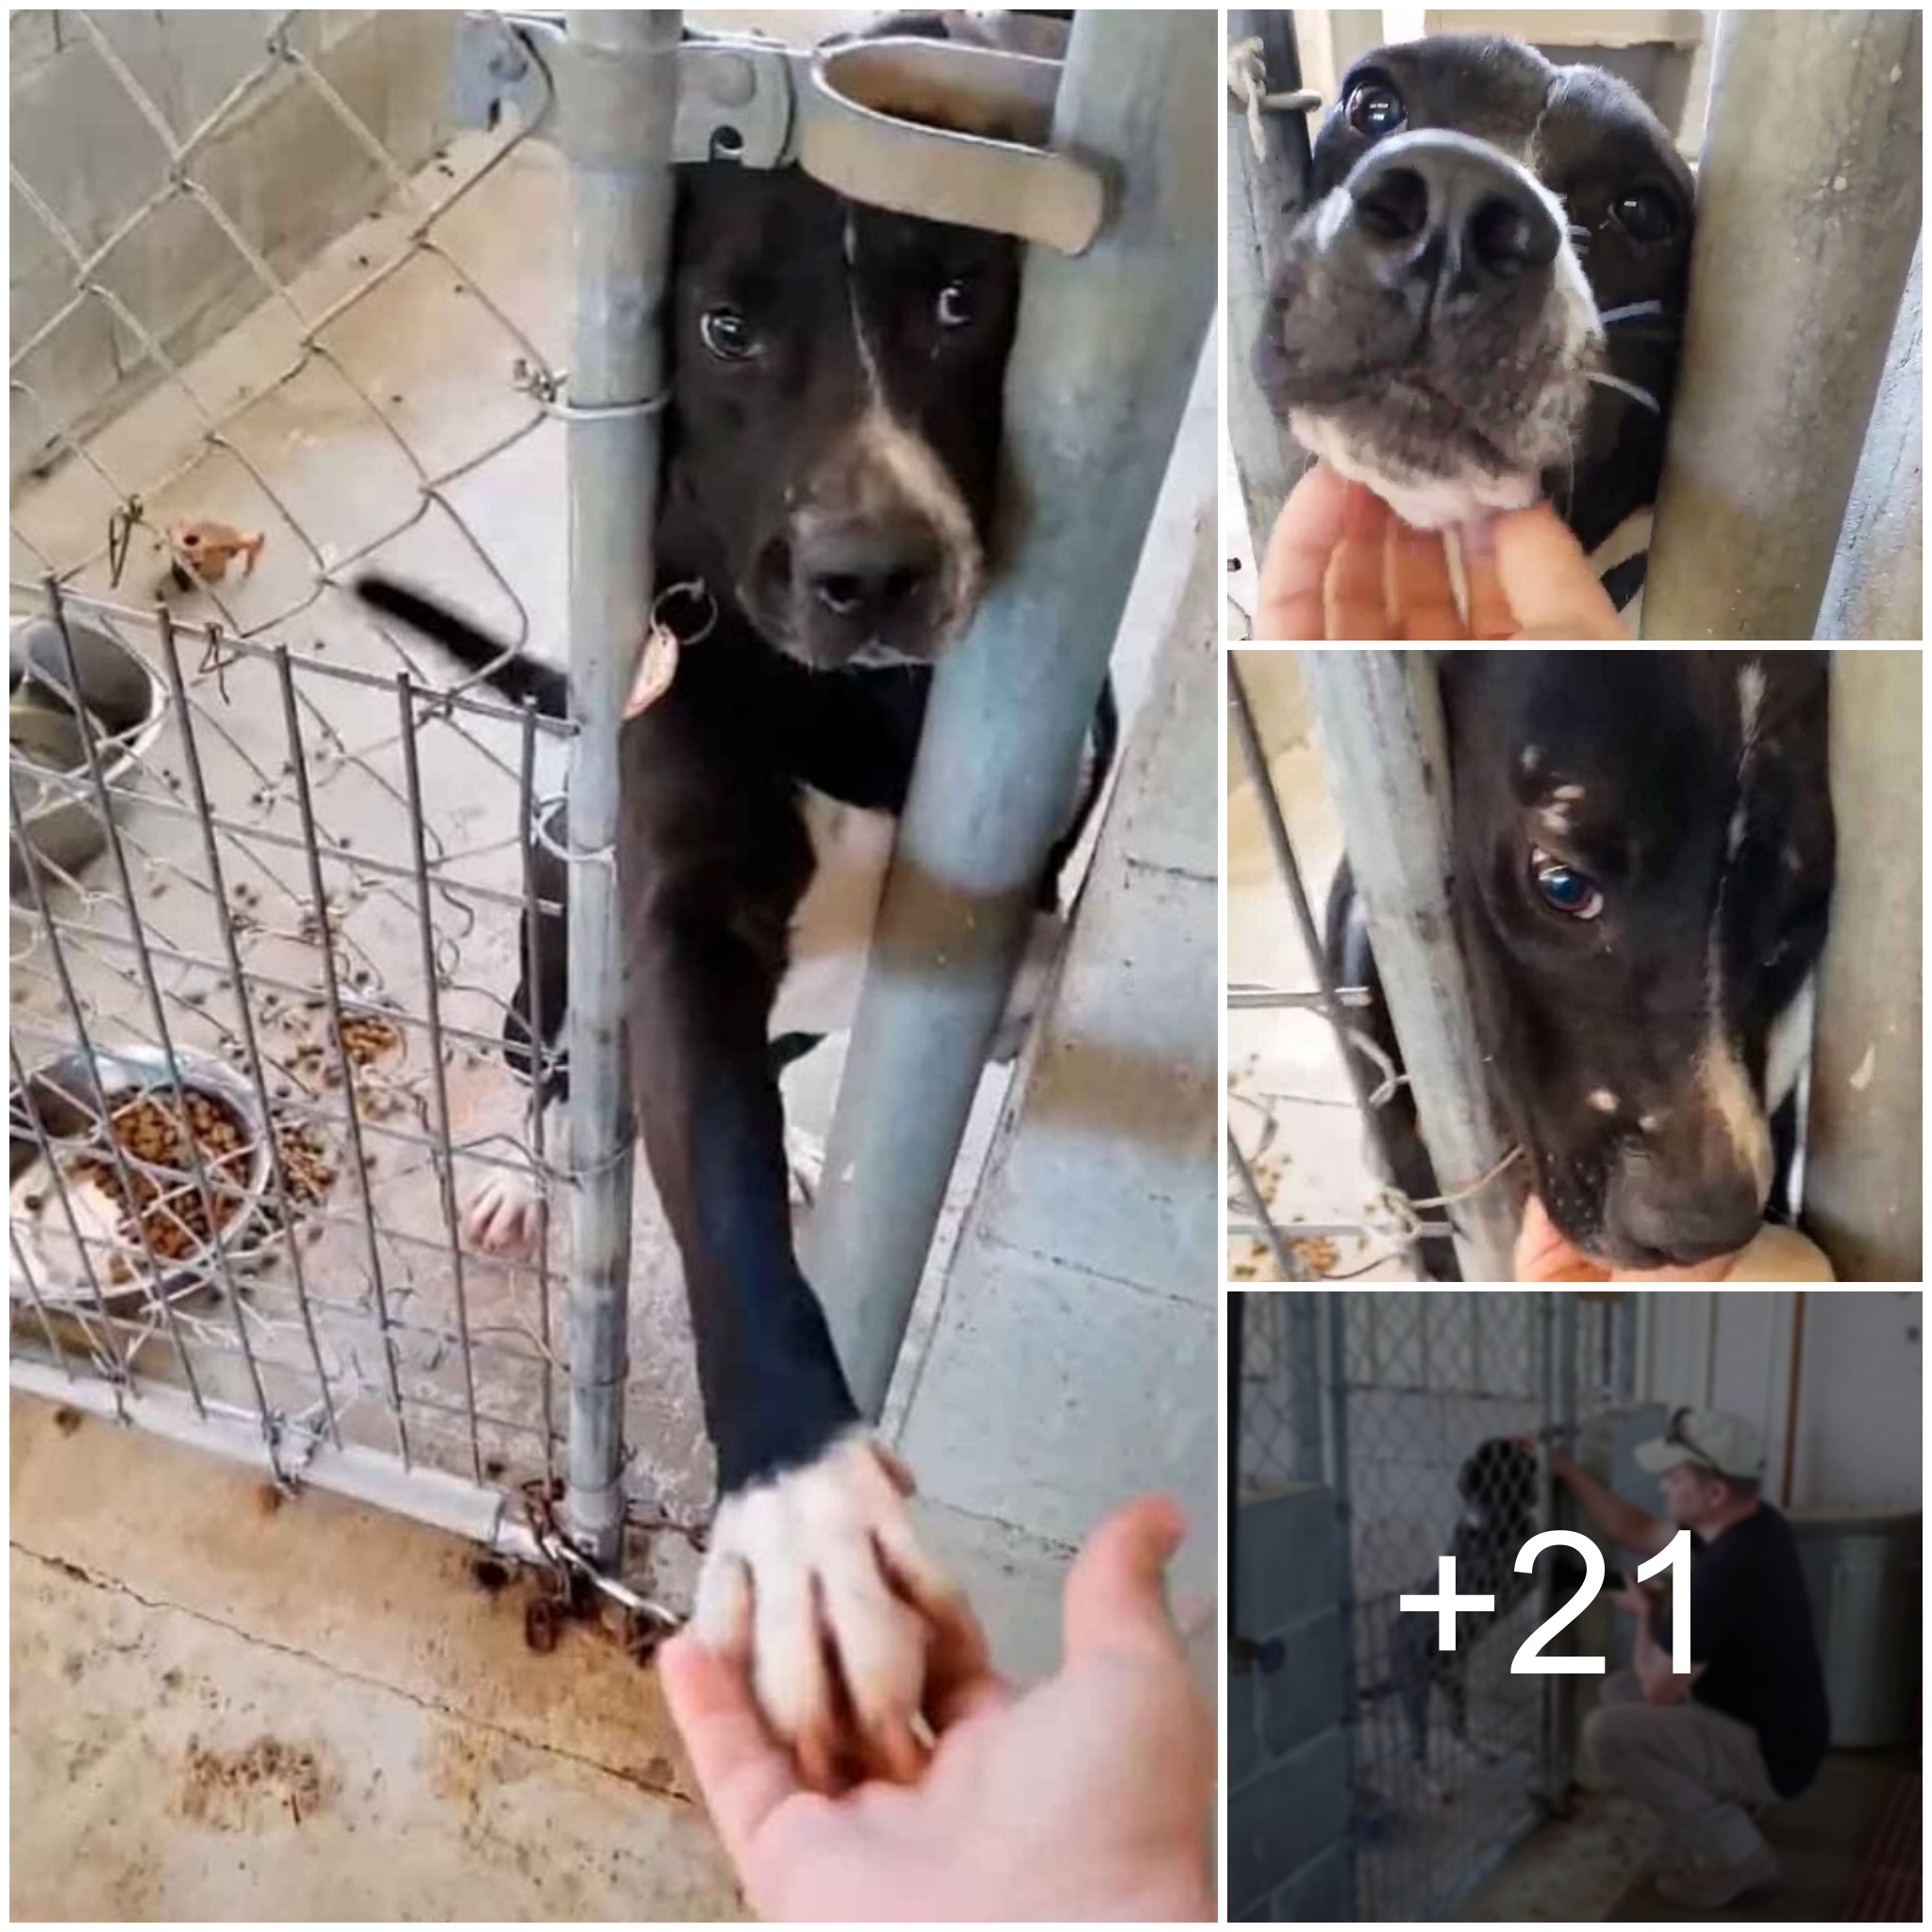 “Charming Action: Dog Reaching Out Paw to People Passing His Cage in Attempt to Make a Connection and Find Adoption”